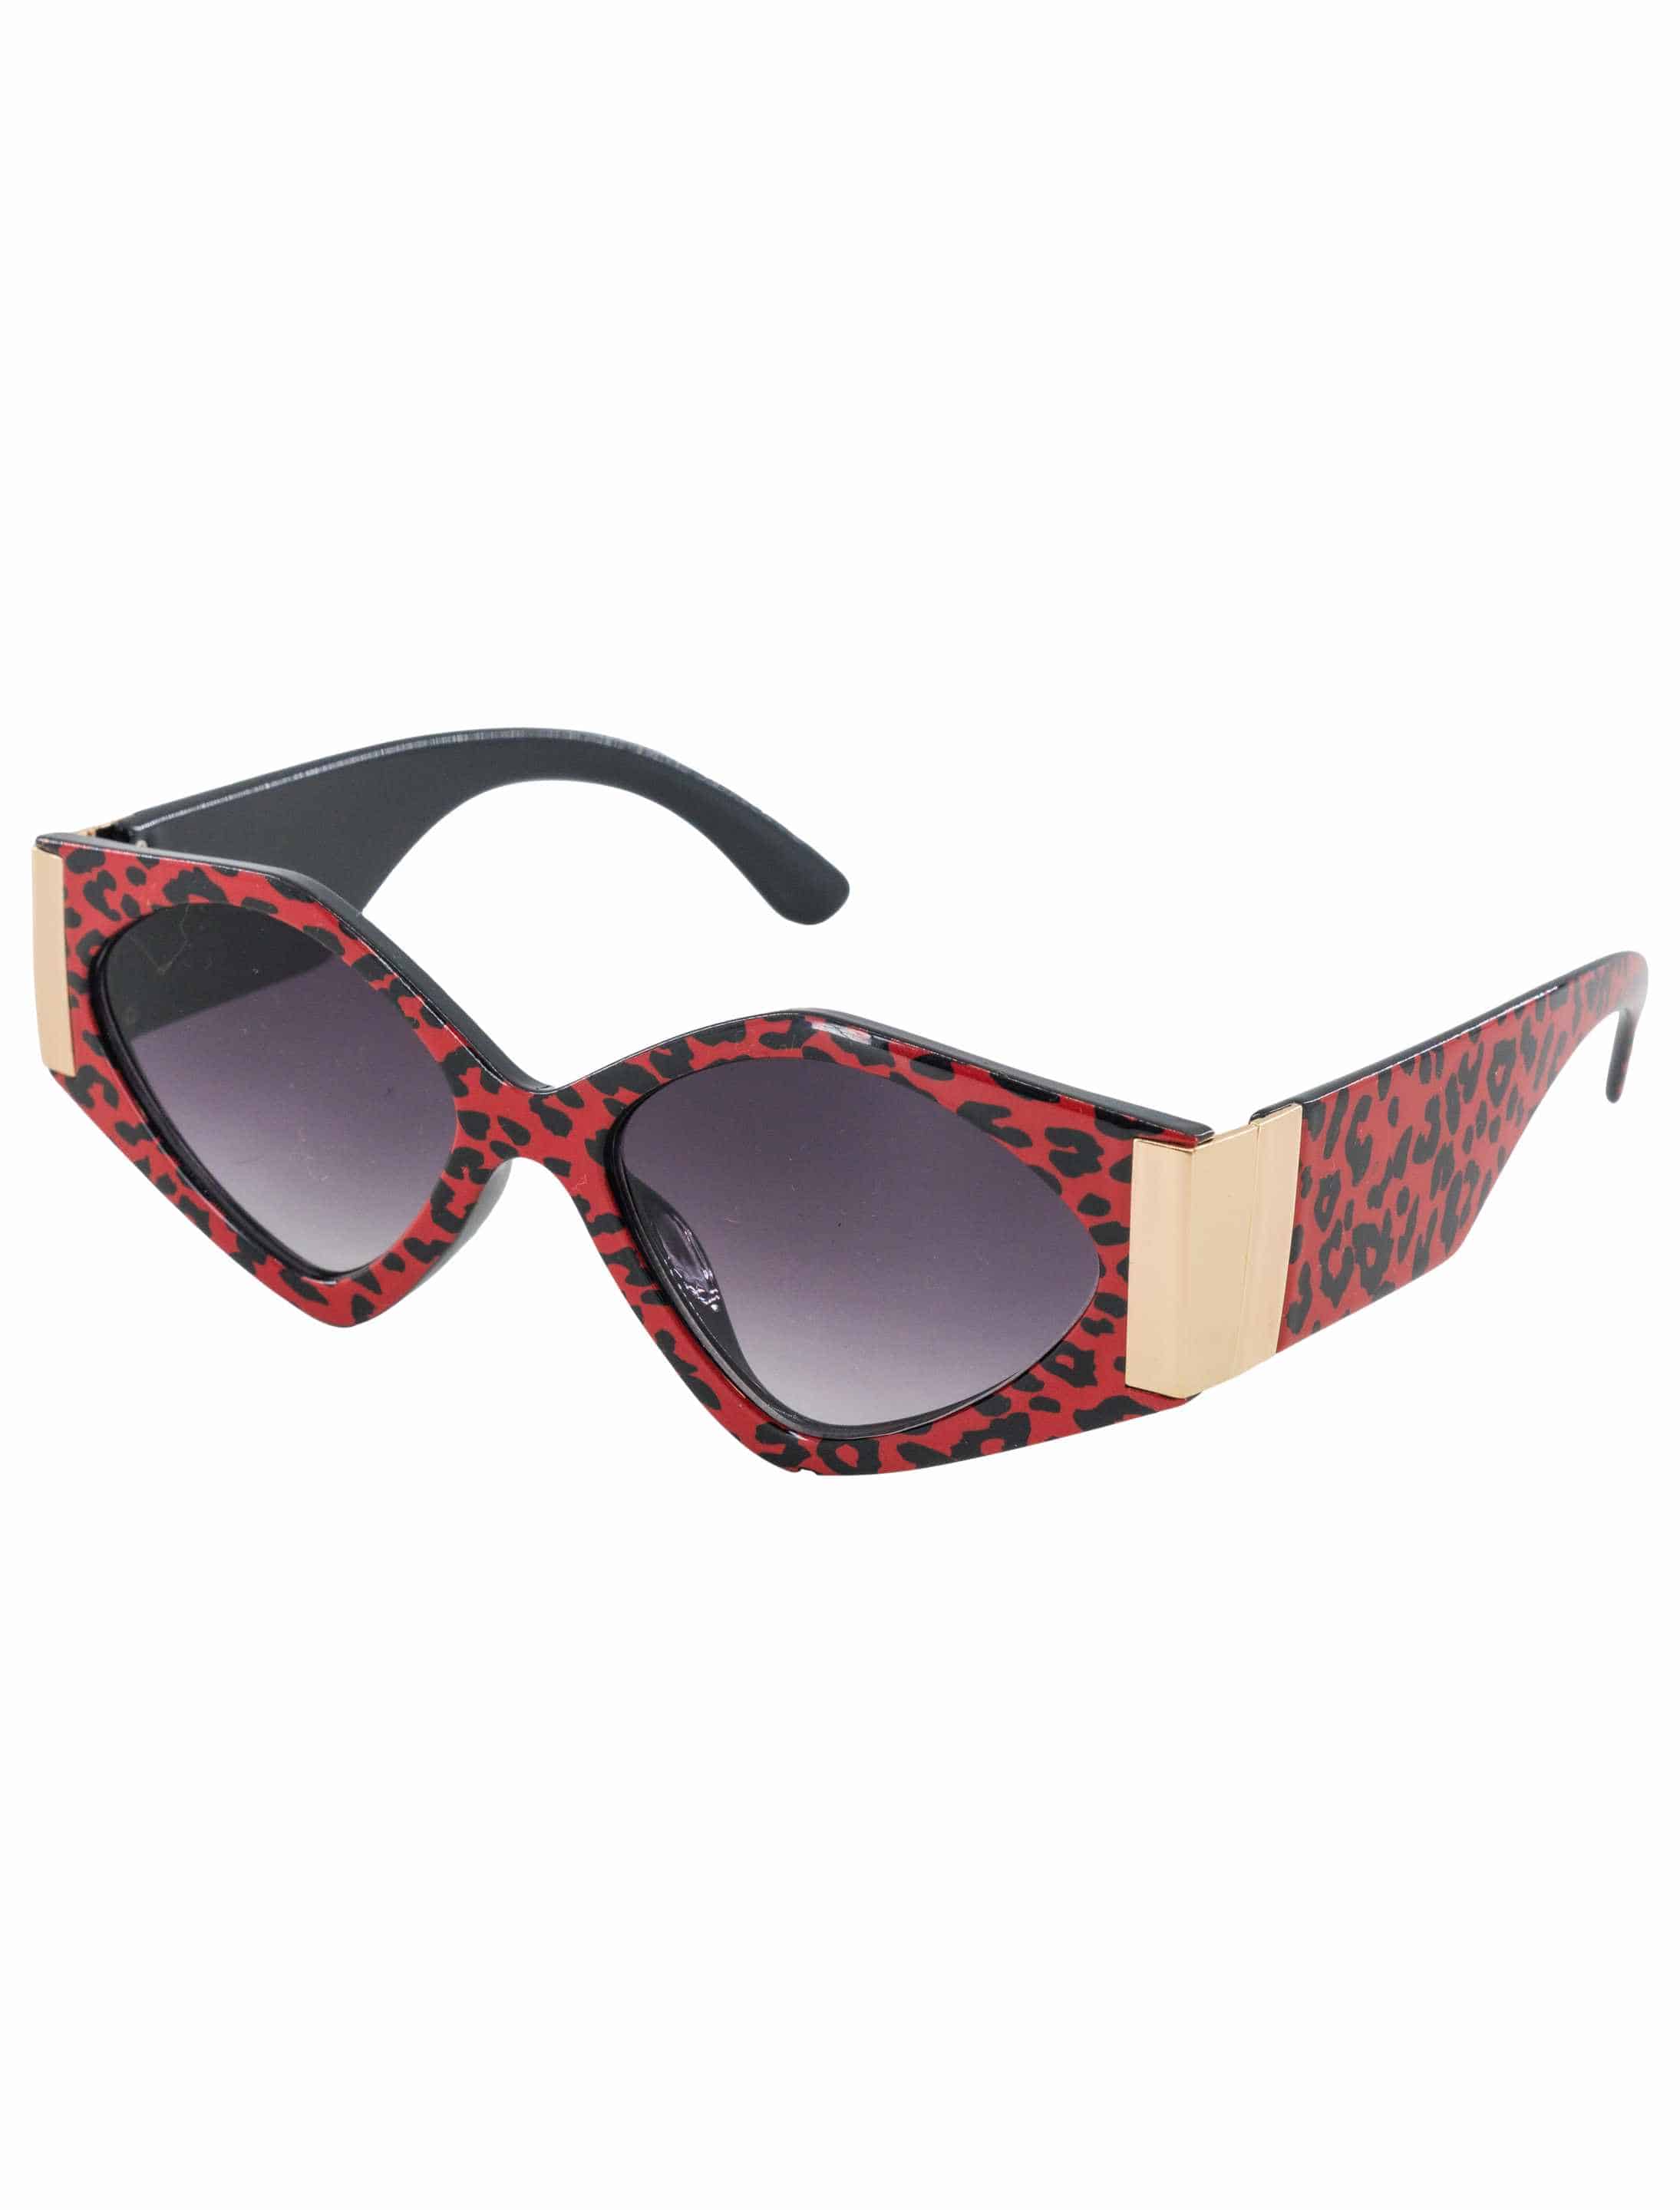 Brille Leopard rot